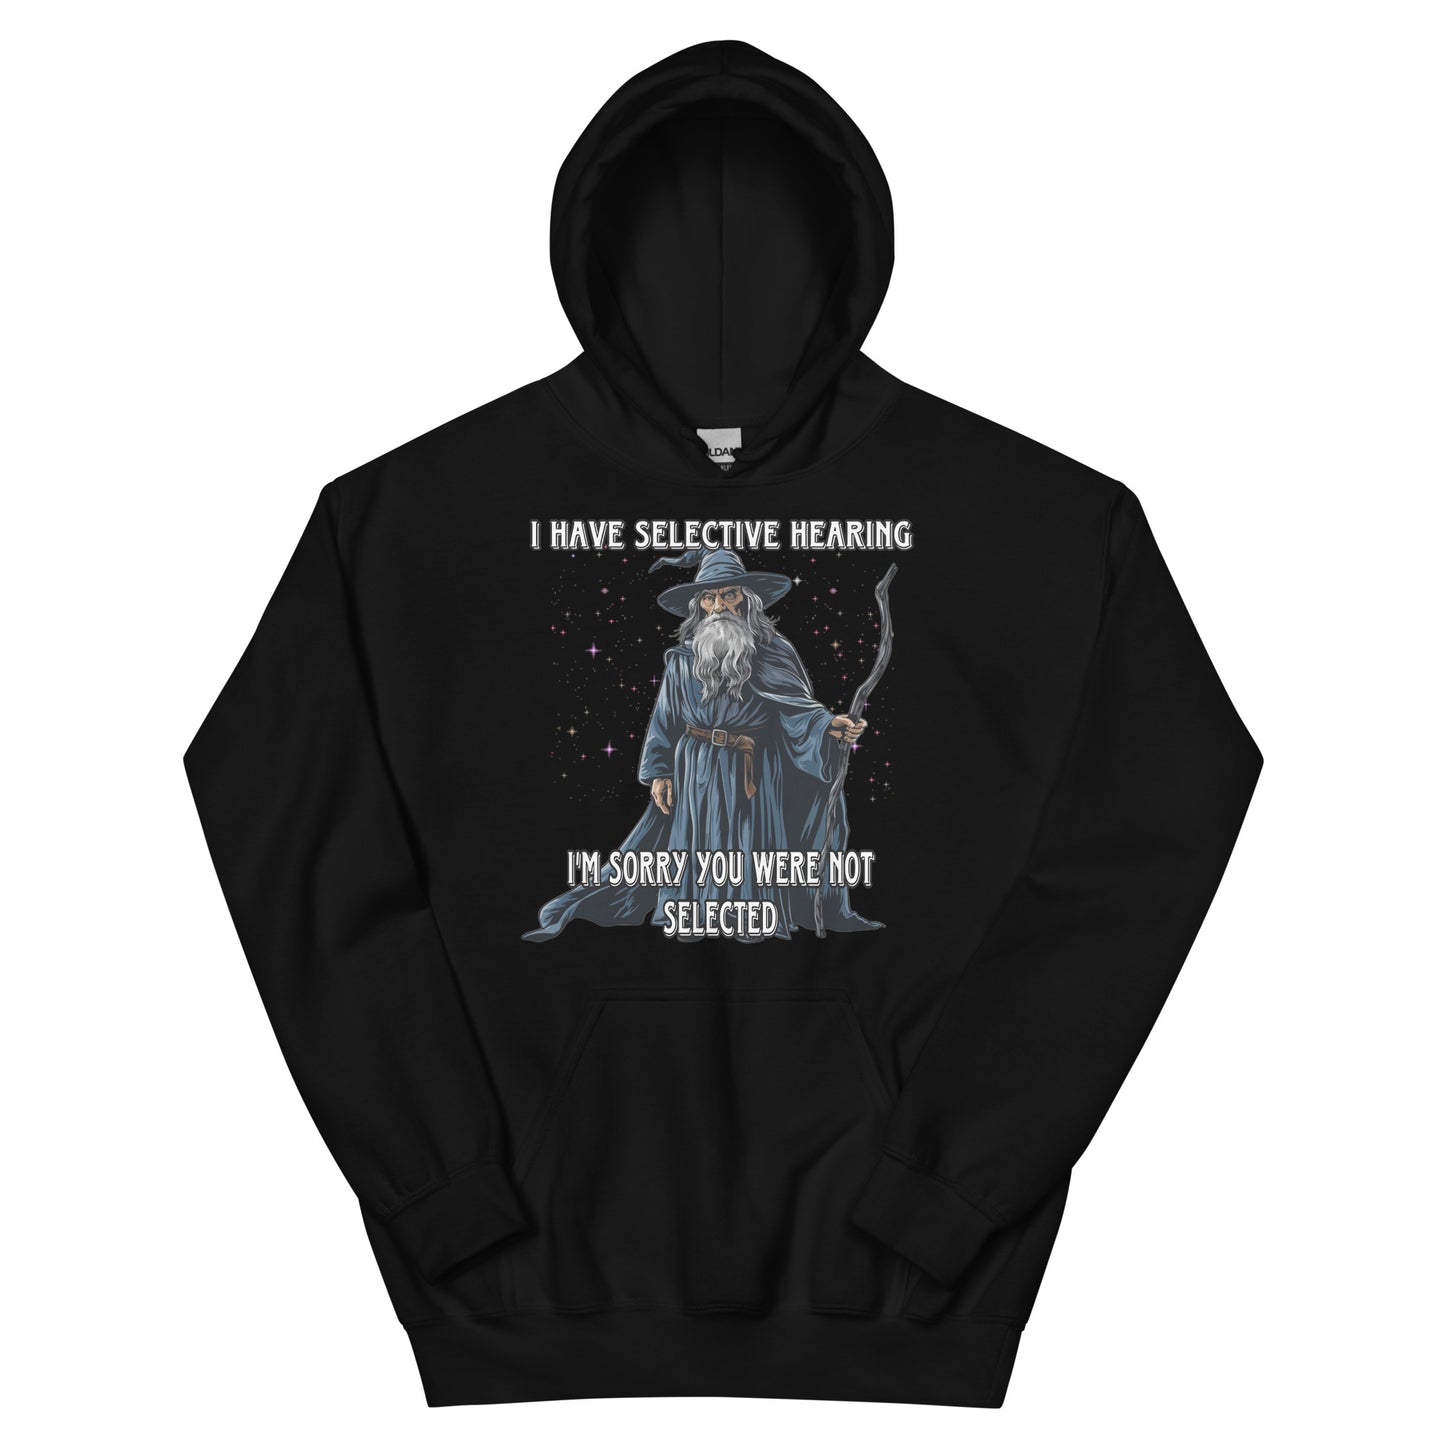 I have selective hearing I’m sorry you were not selected Hoodie